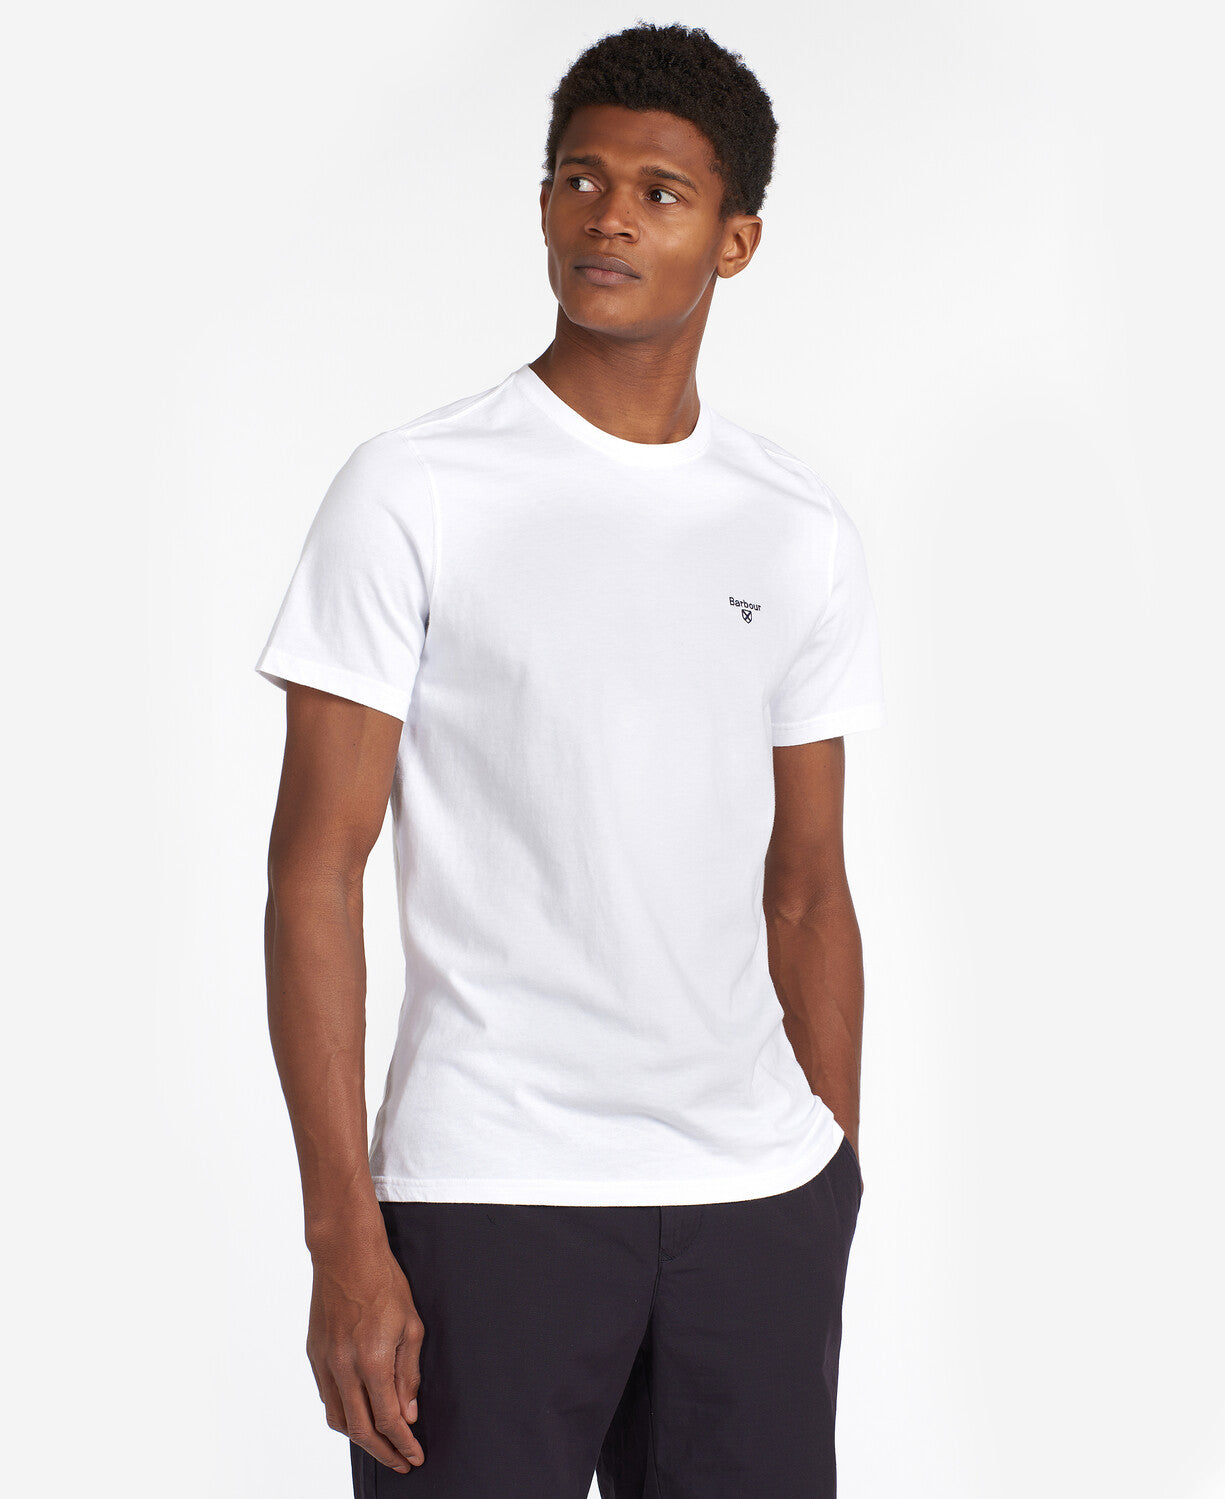 Barbour Essential Sports T-Shirt WH11 White